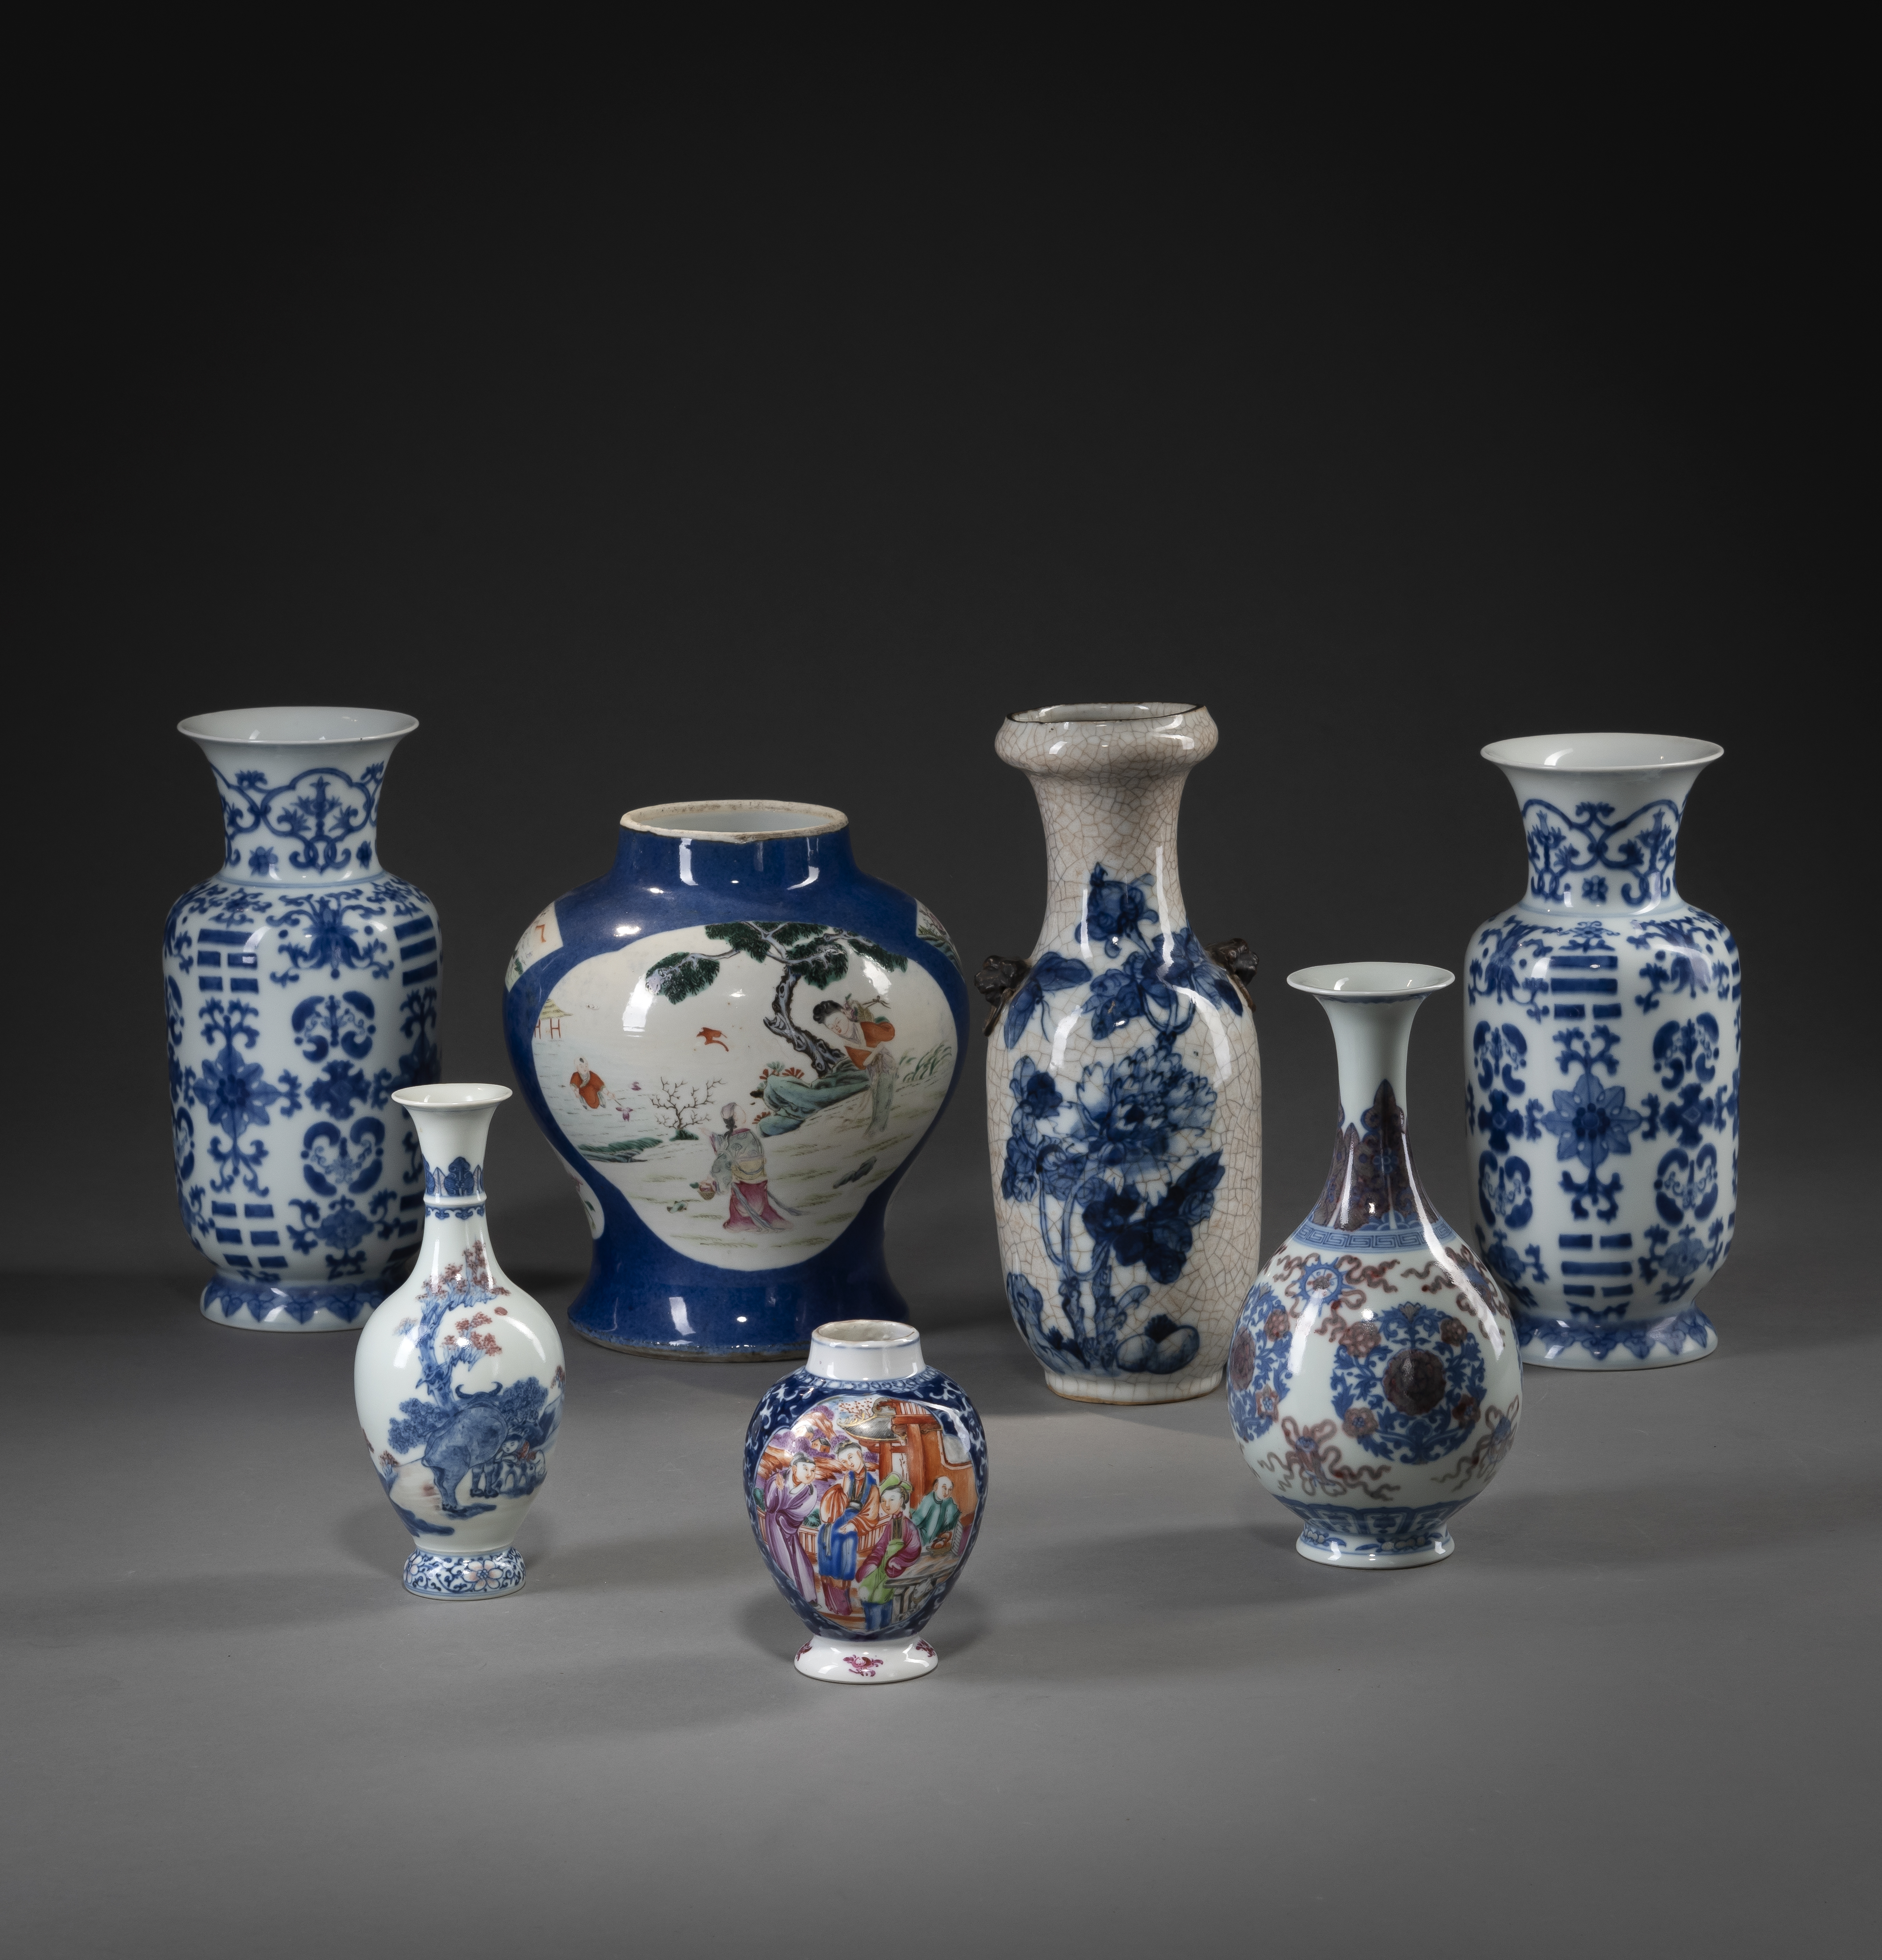 SEVEN BLUE AND WHITE PORCELAIN VASES SHOWING FIGURES, A LANDSCAPE, AND TRIGRAMS - Image 2 of 5